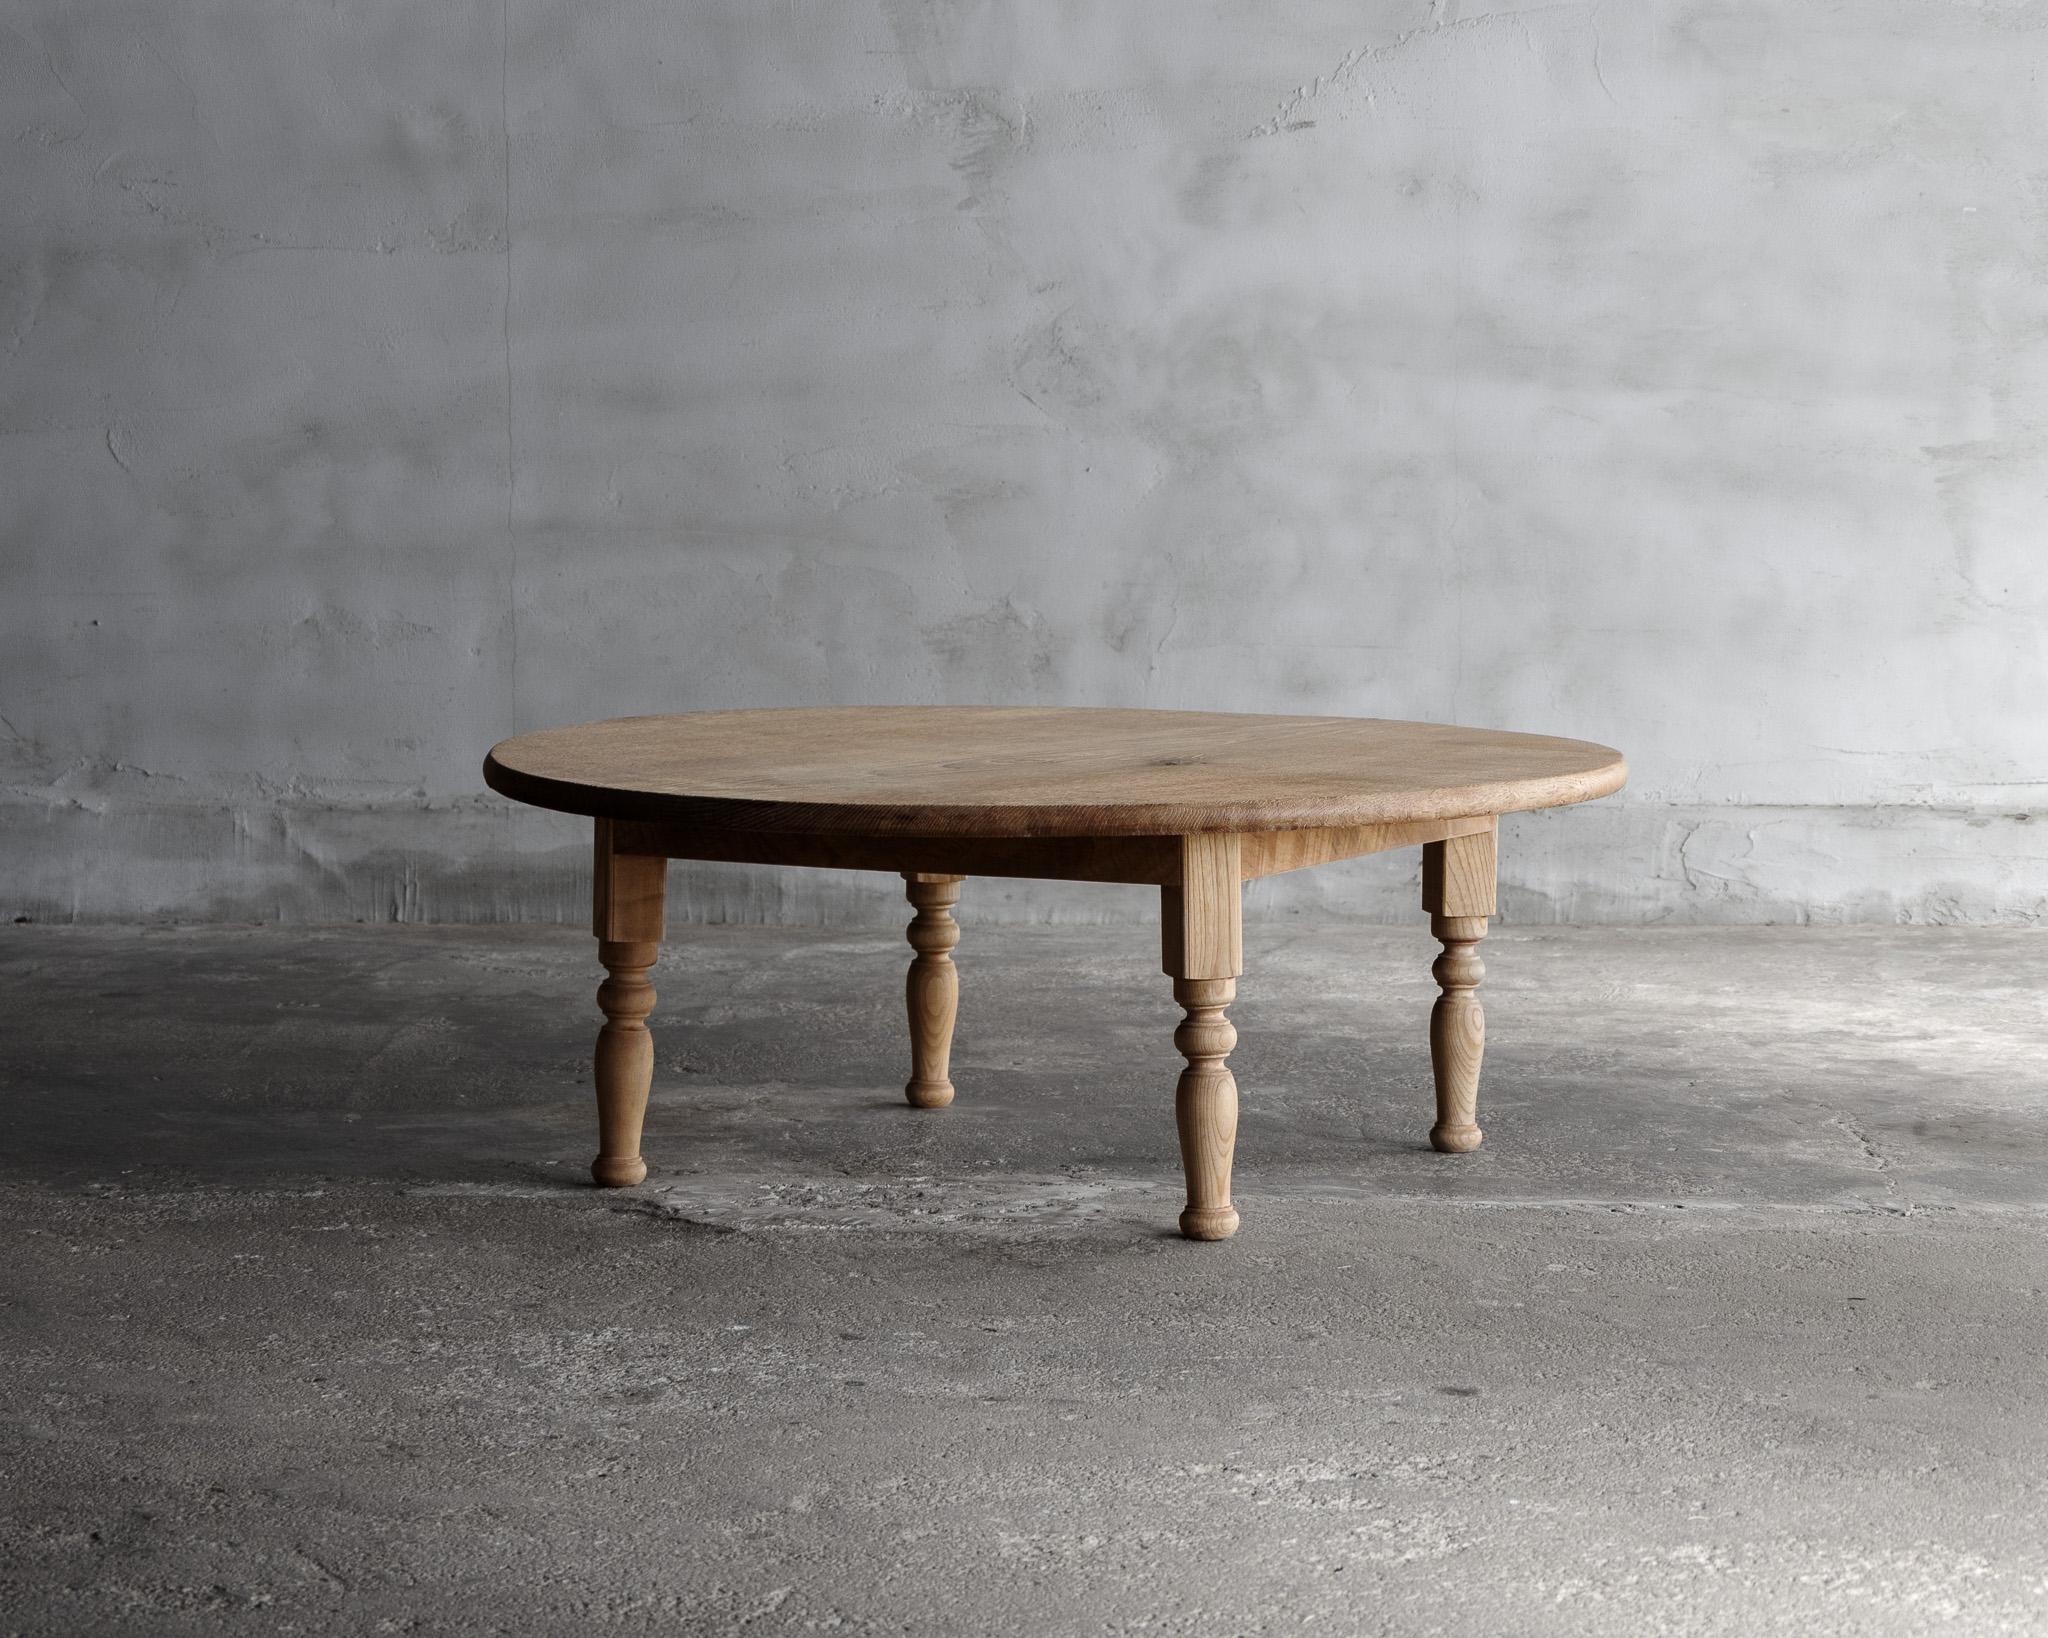 This antique table is a low table made during the Taisho era or the early Showa period. It is a traditional Japanese 